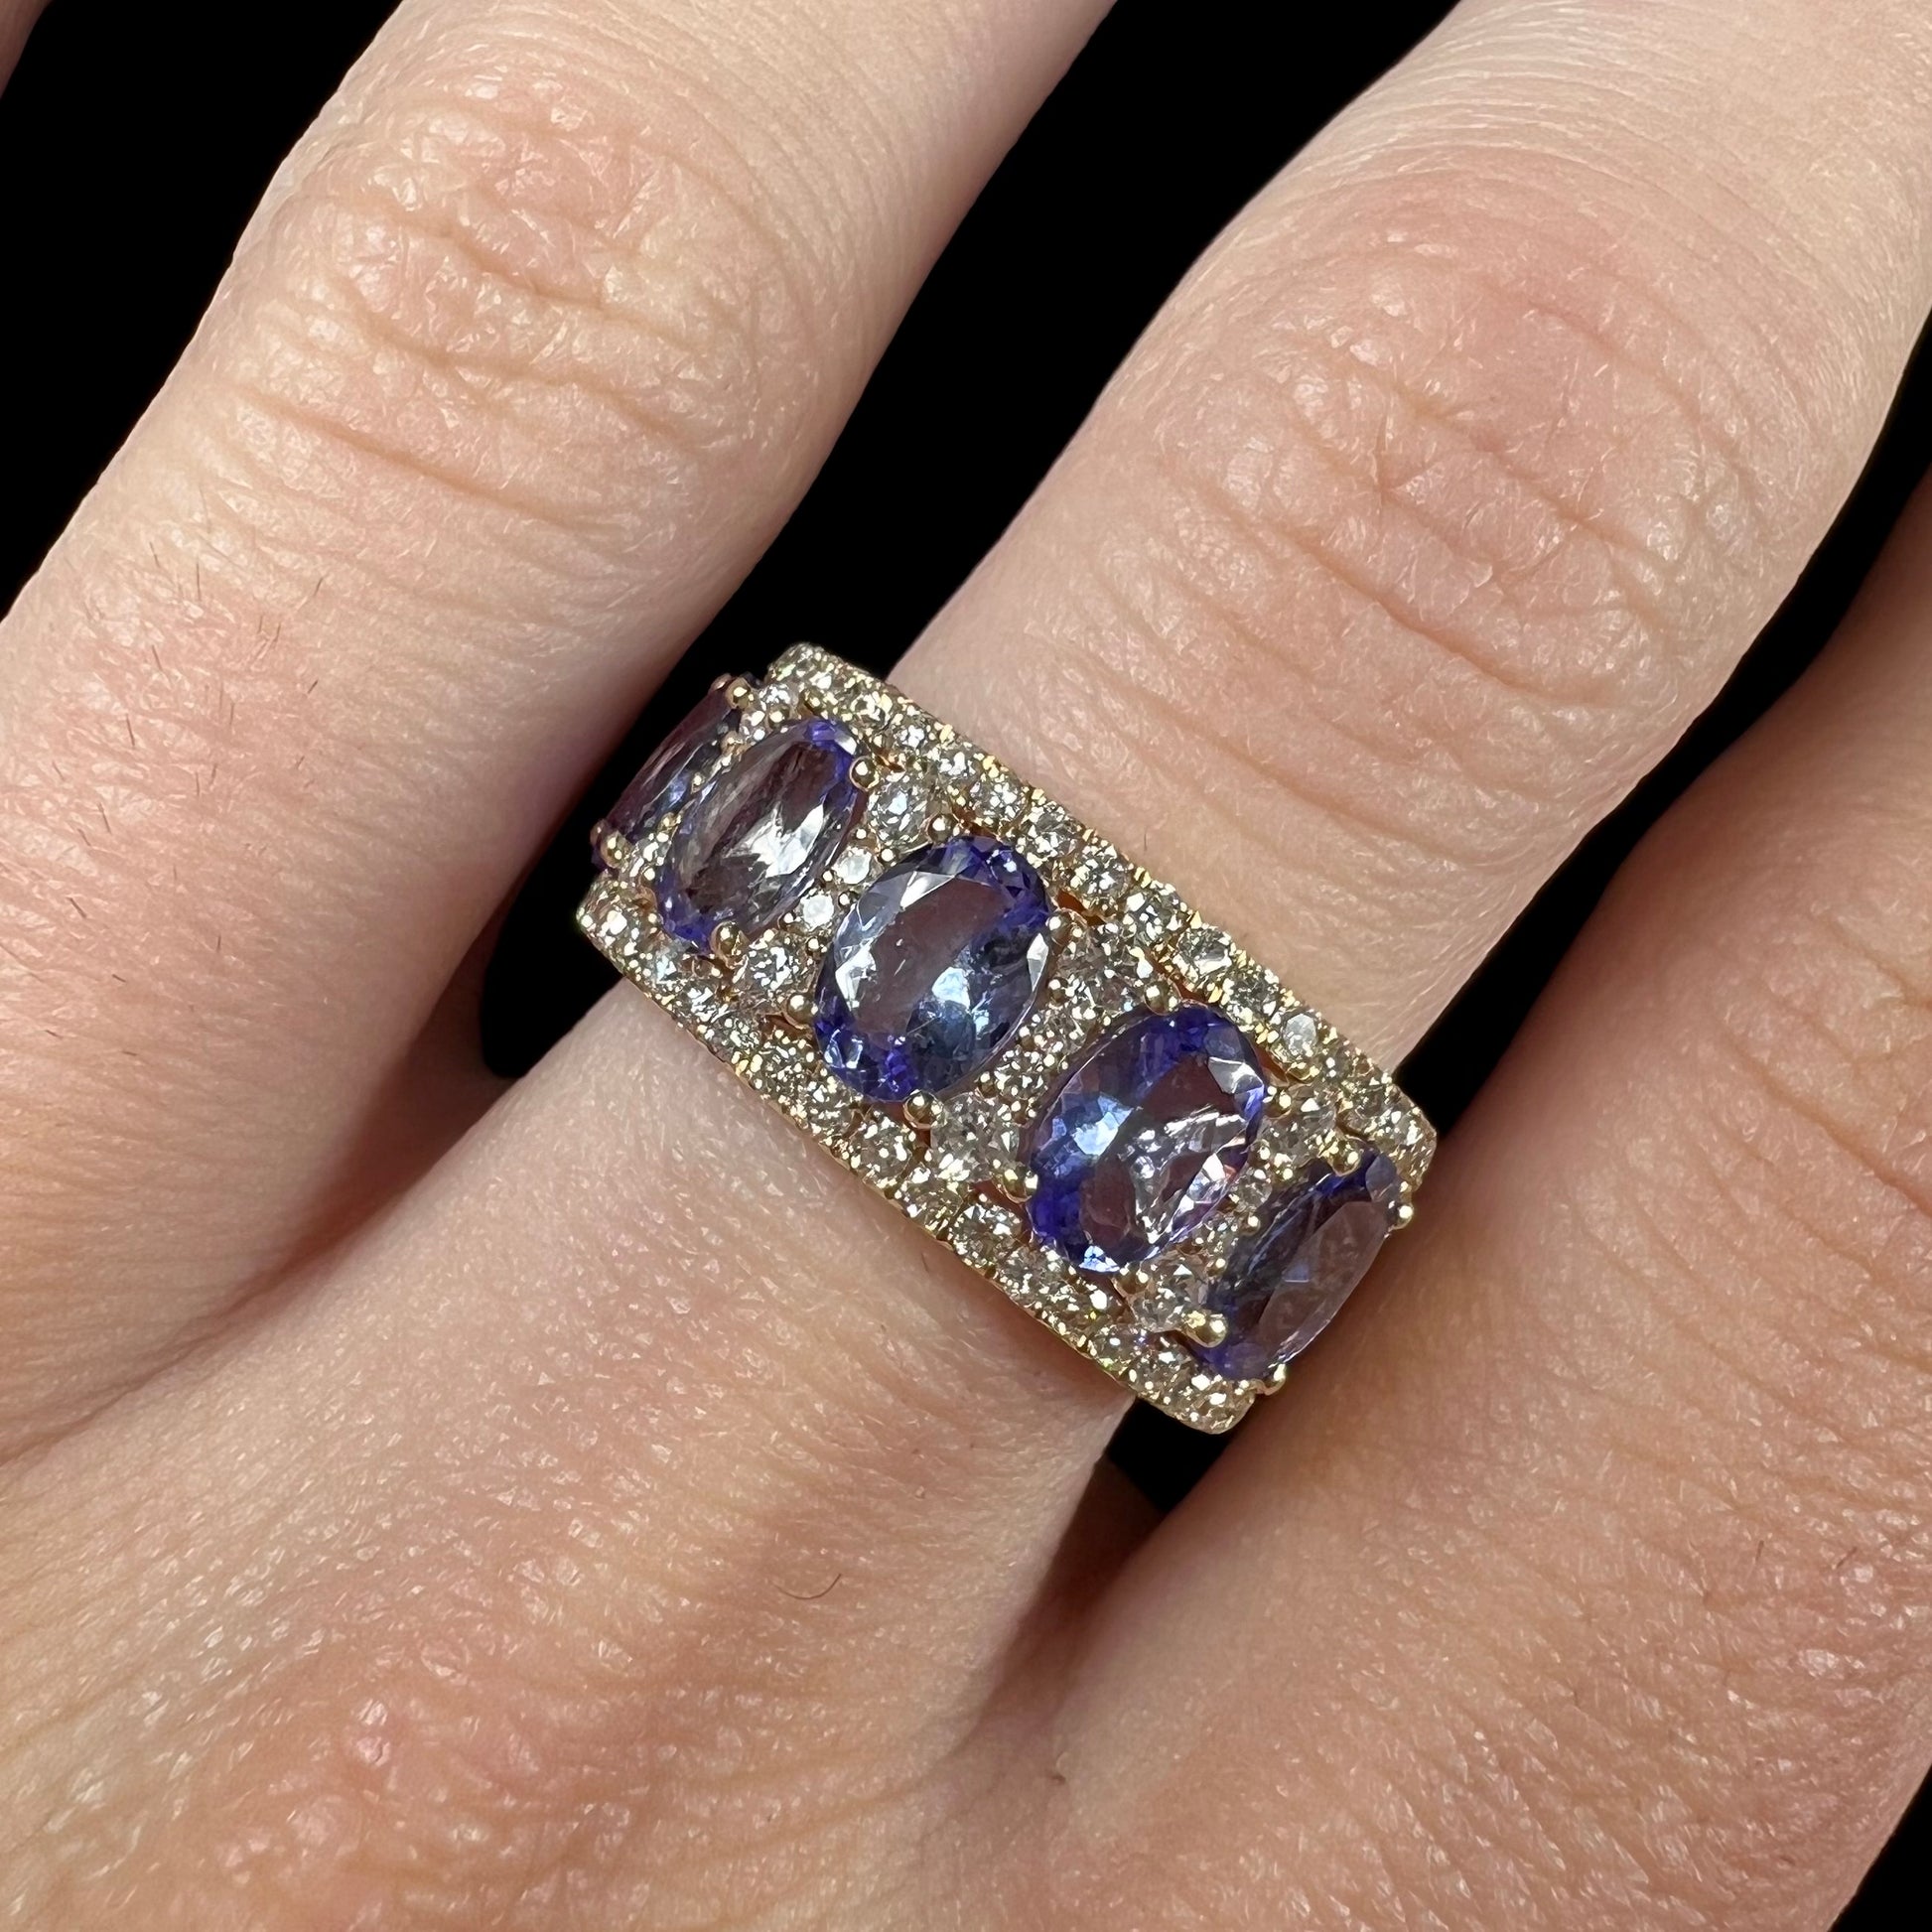 A gold and diamond ladies' band set with five oval cut tanzanite stones.